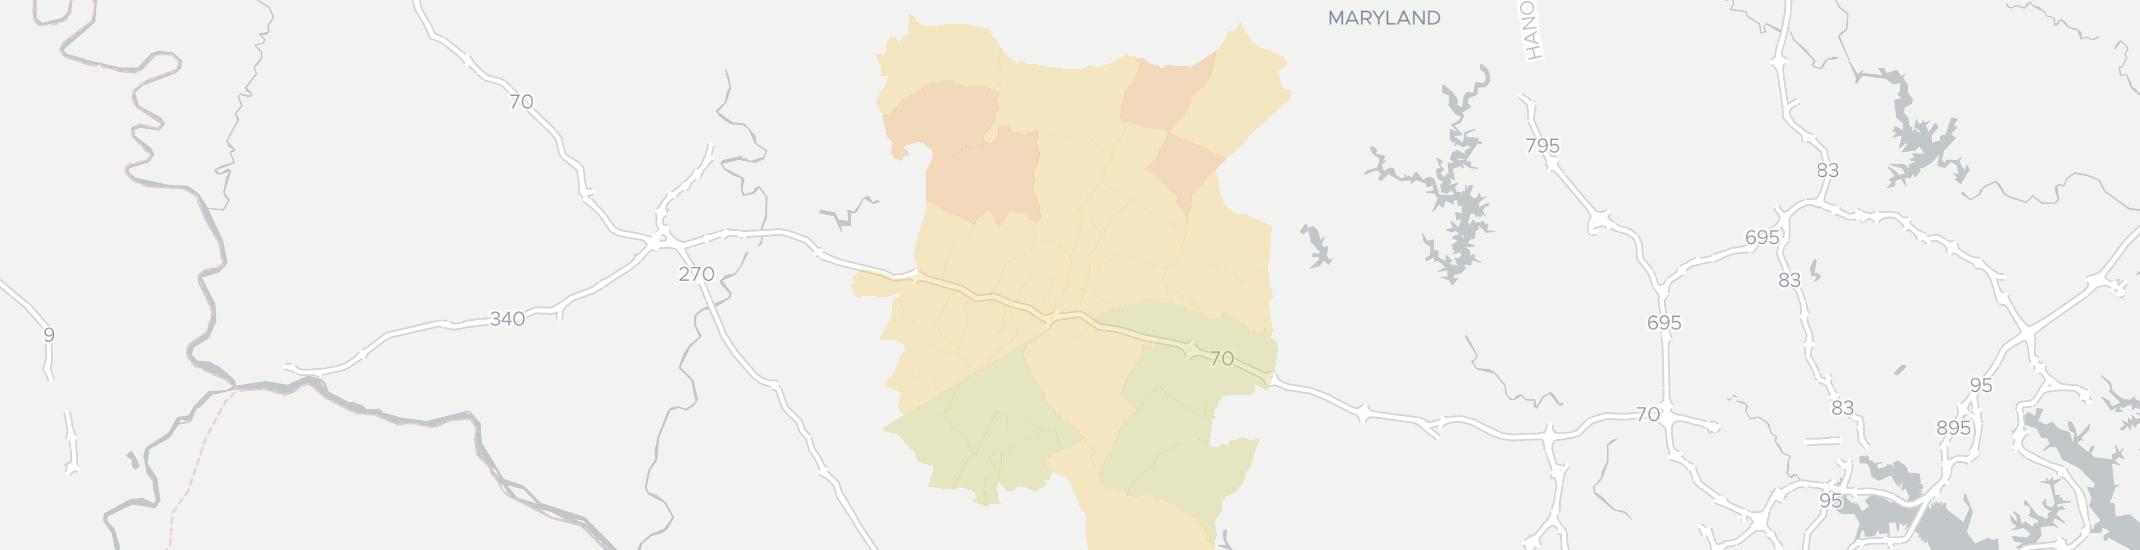 Mount Airy Internet Competition Map. Click for interactive map